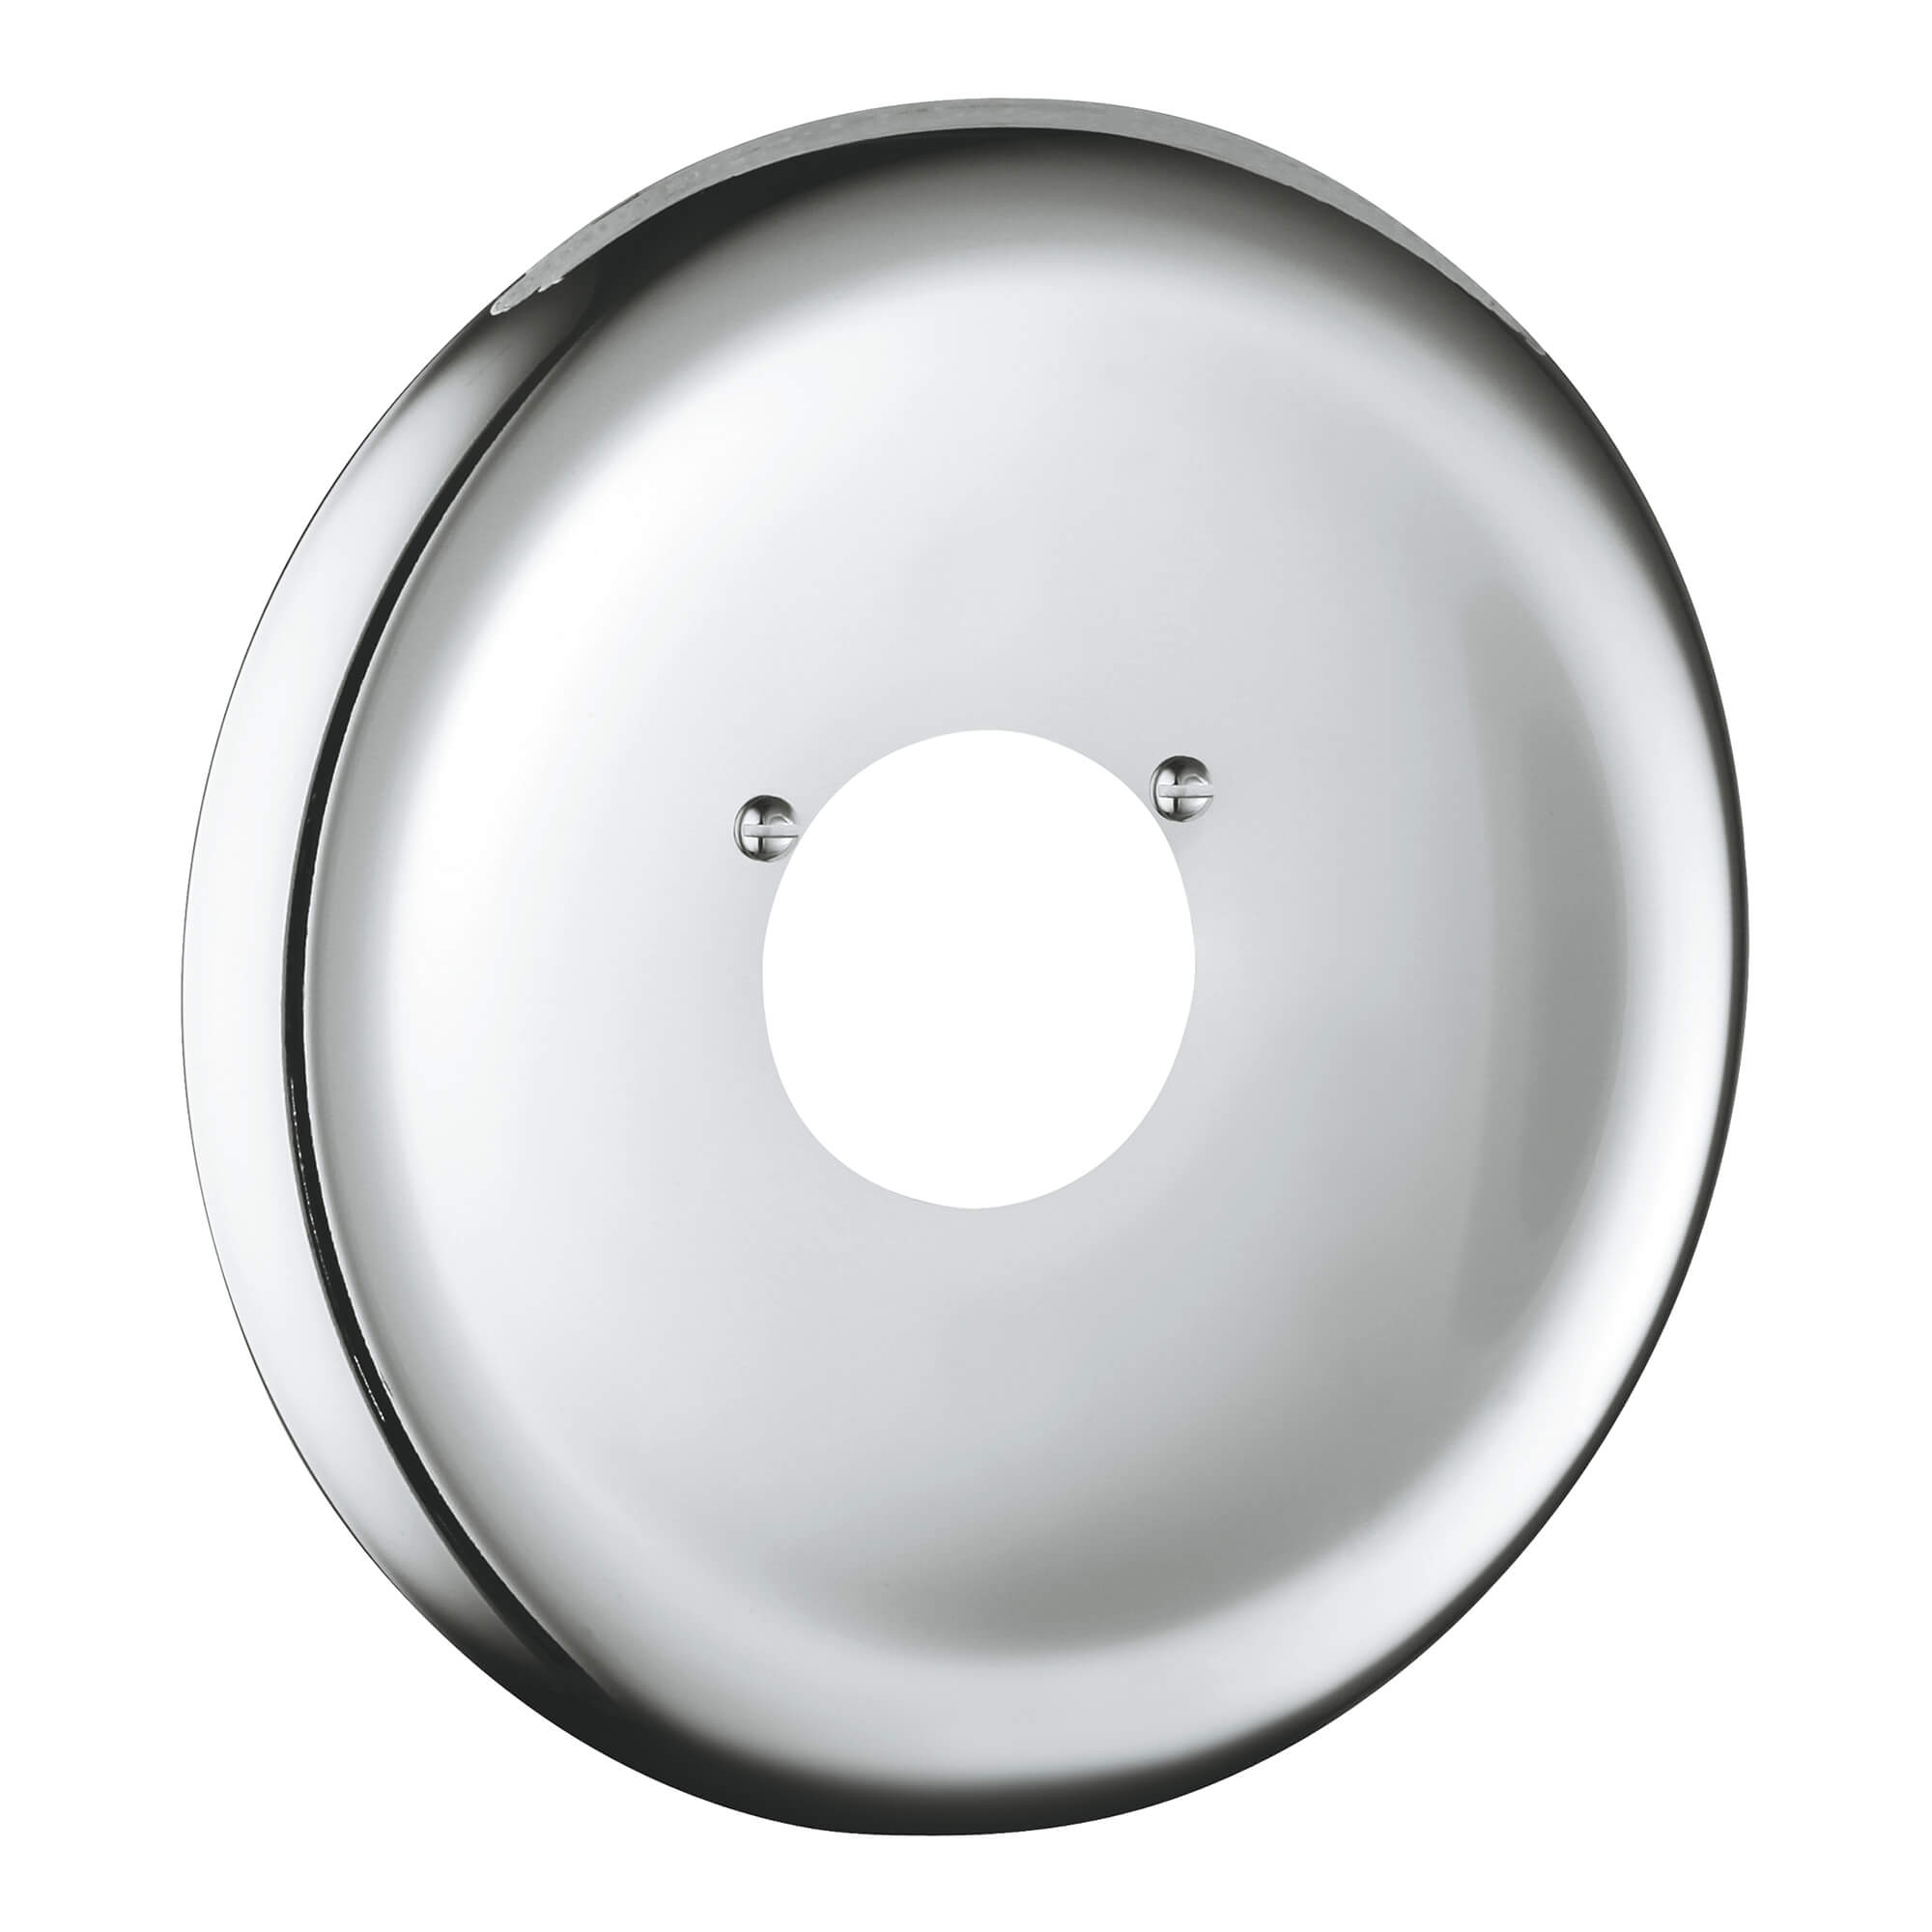 Escutcheon 6 3 4 Inch From 1979 GROHE CHROME